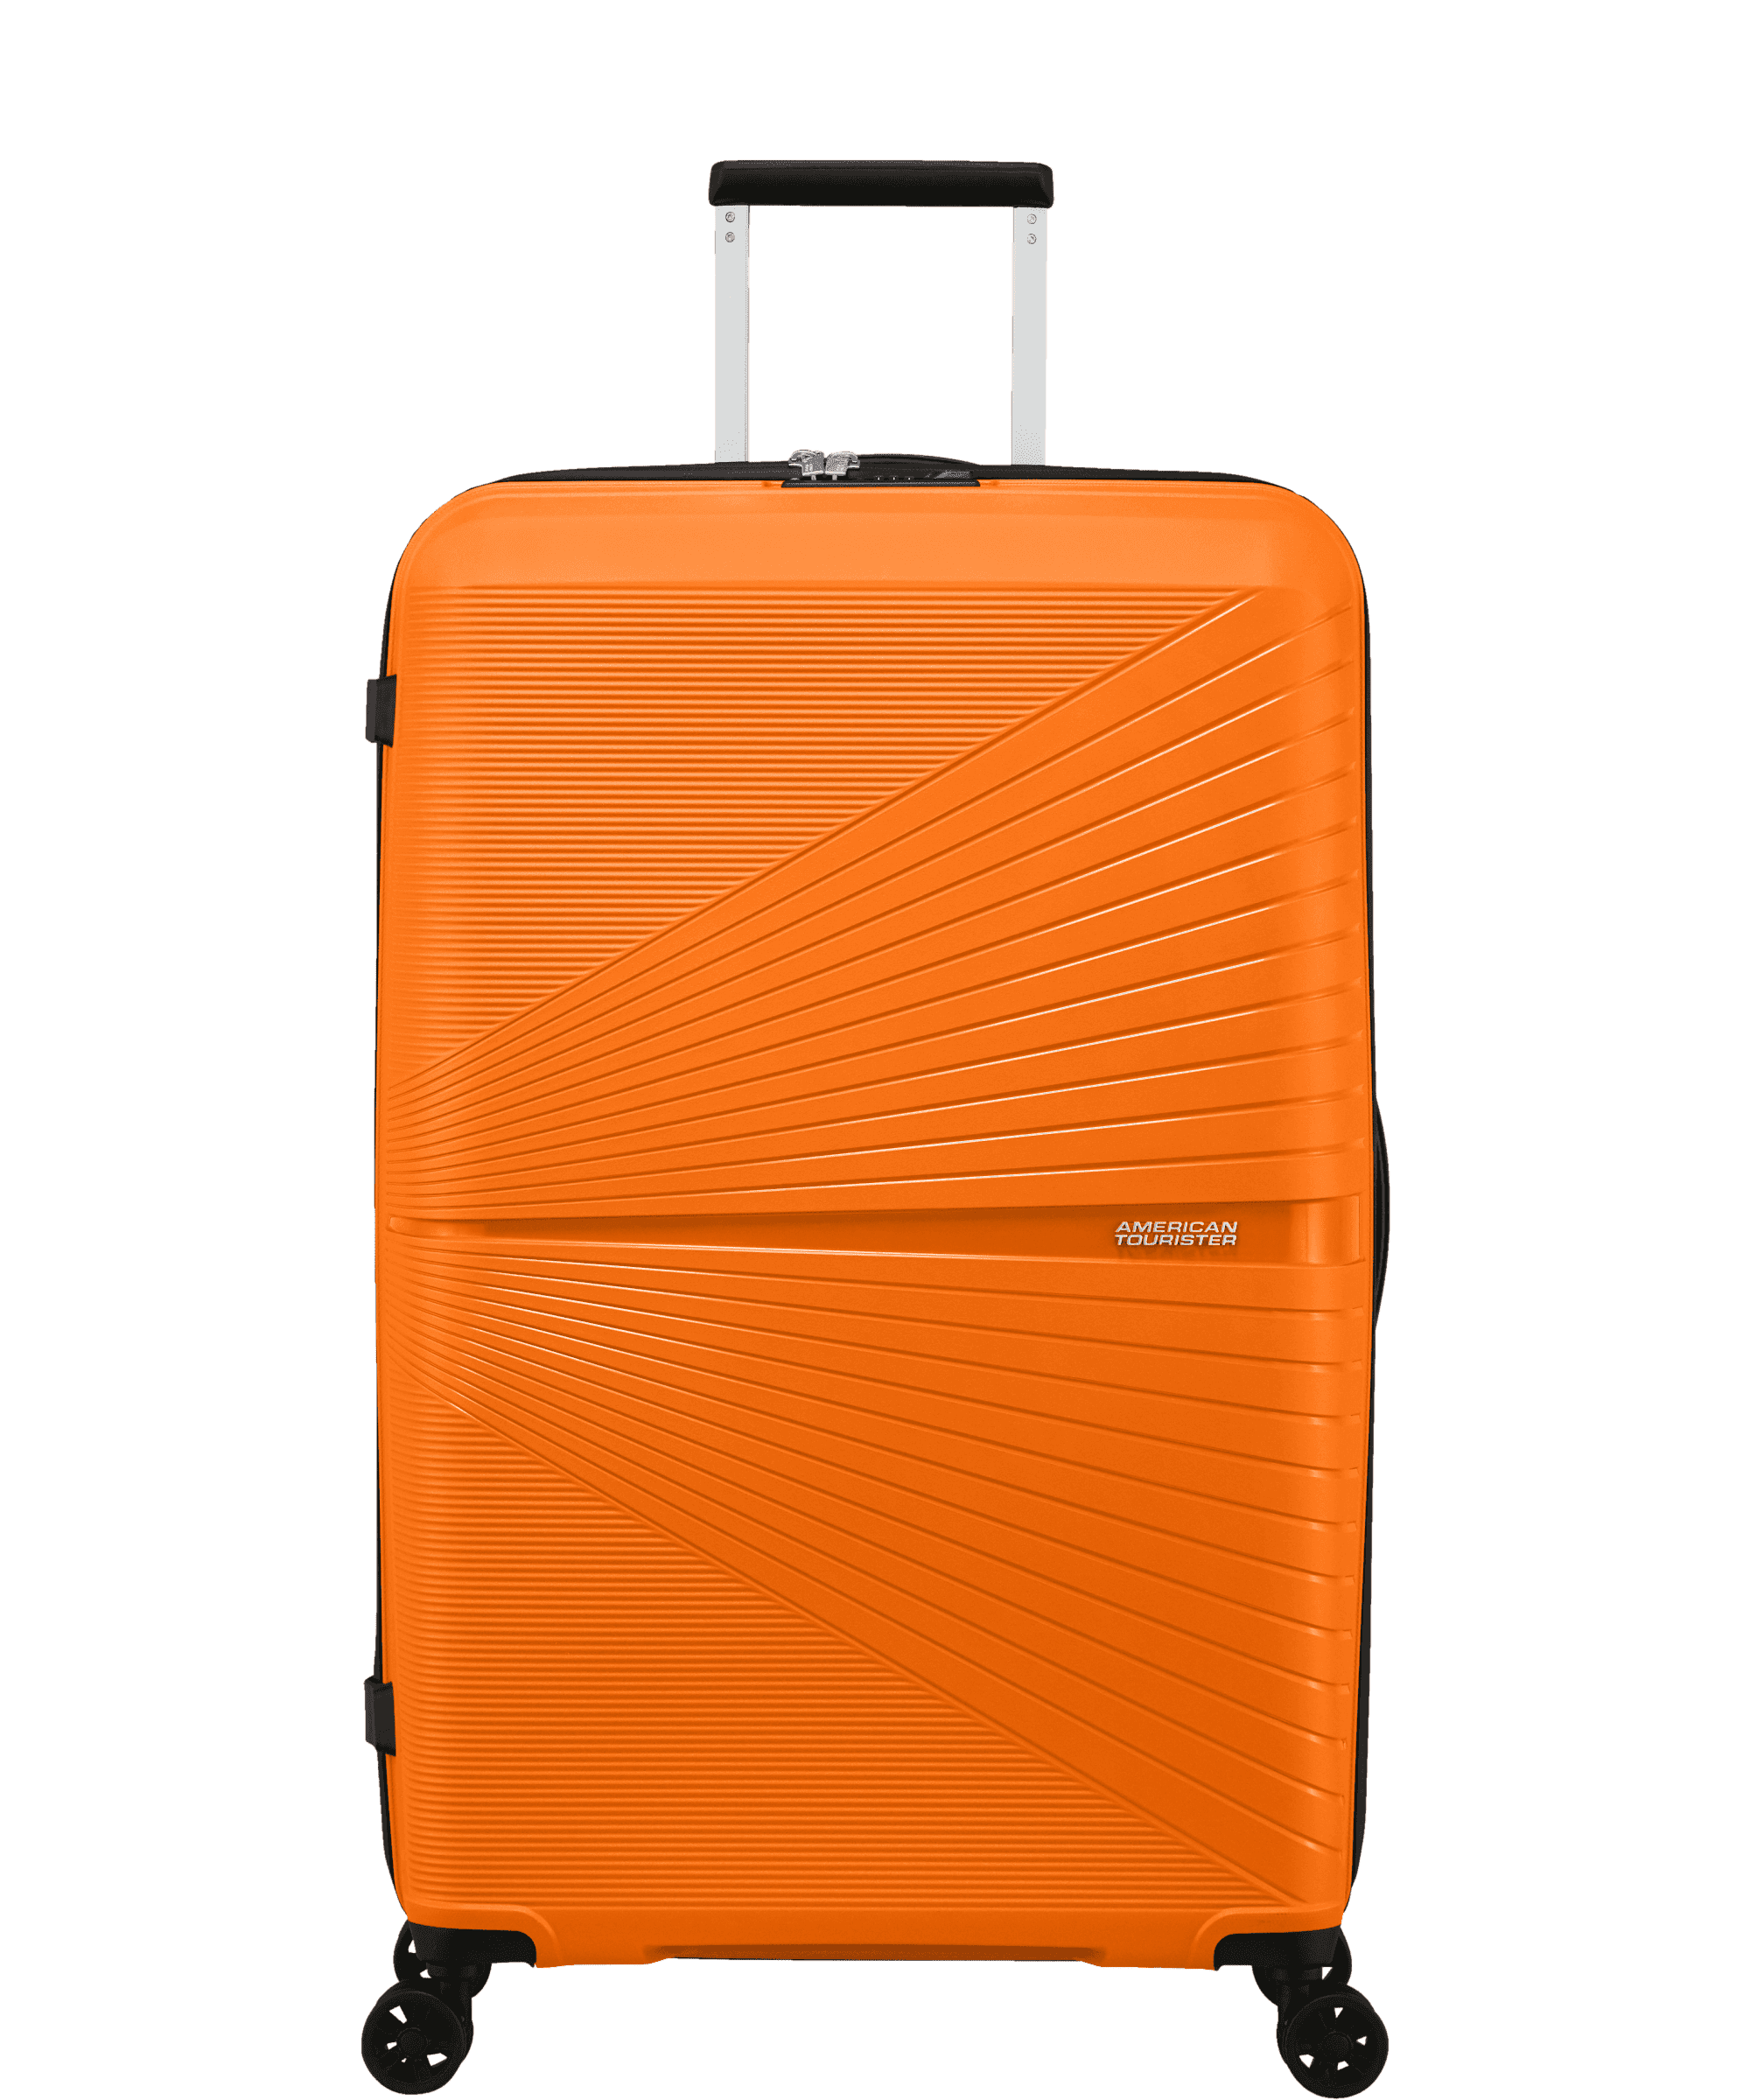 American Tourister Trolley Bags